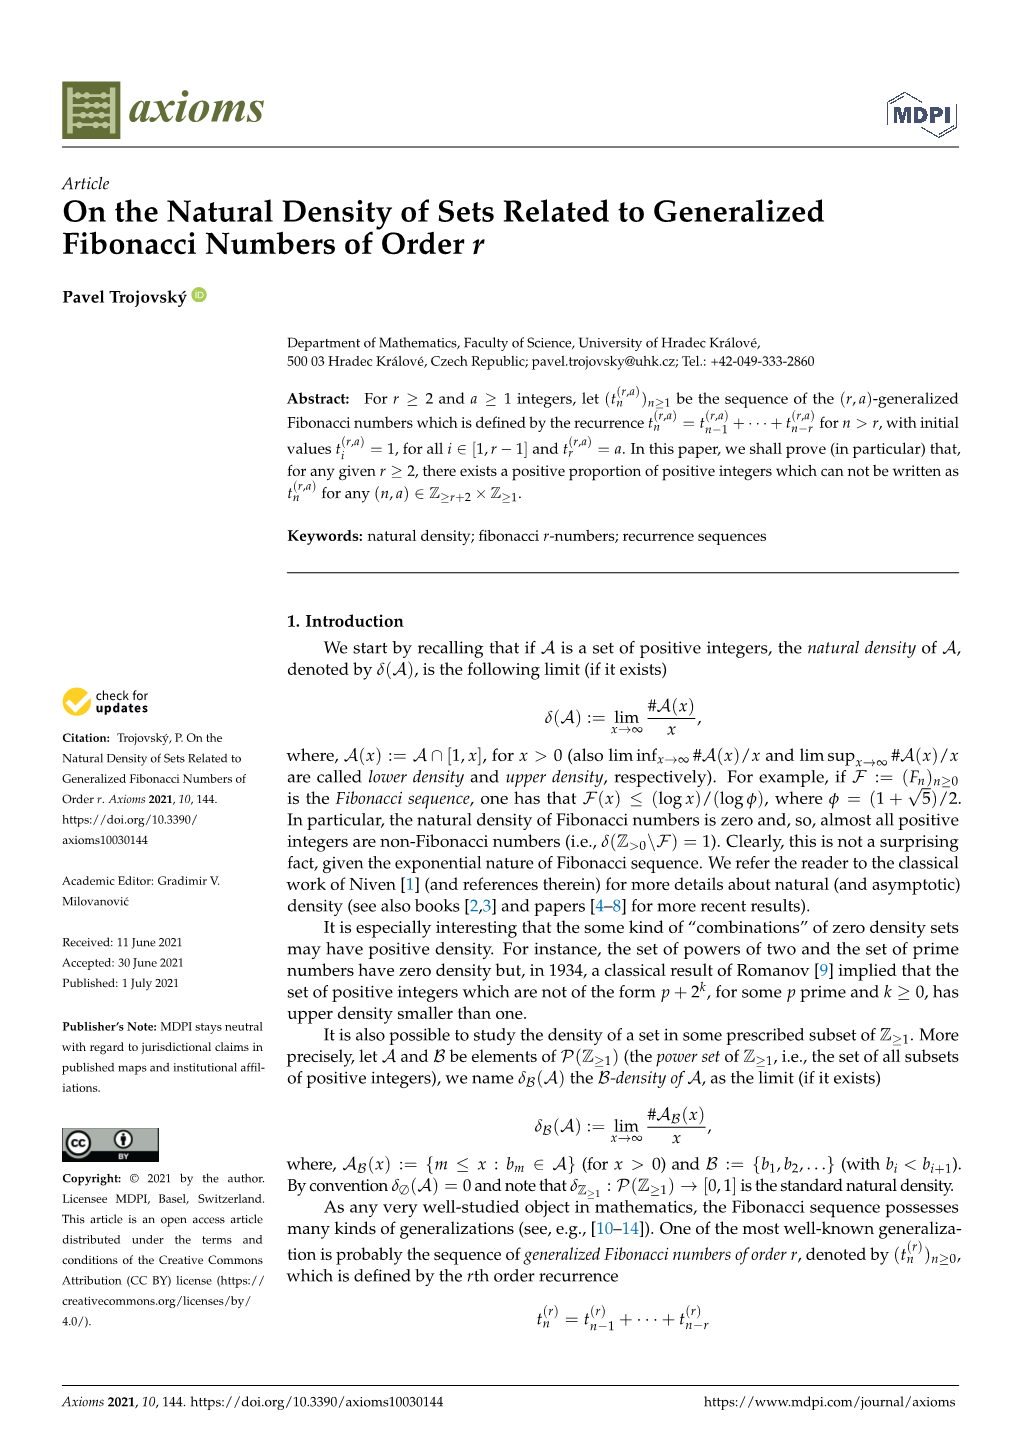 On the Natural Density of Sets Related to Generalized Fibonacci Numbers of Order R